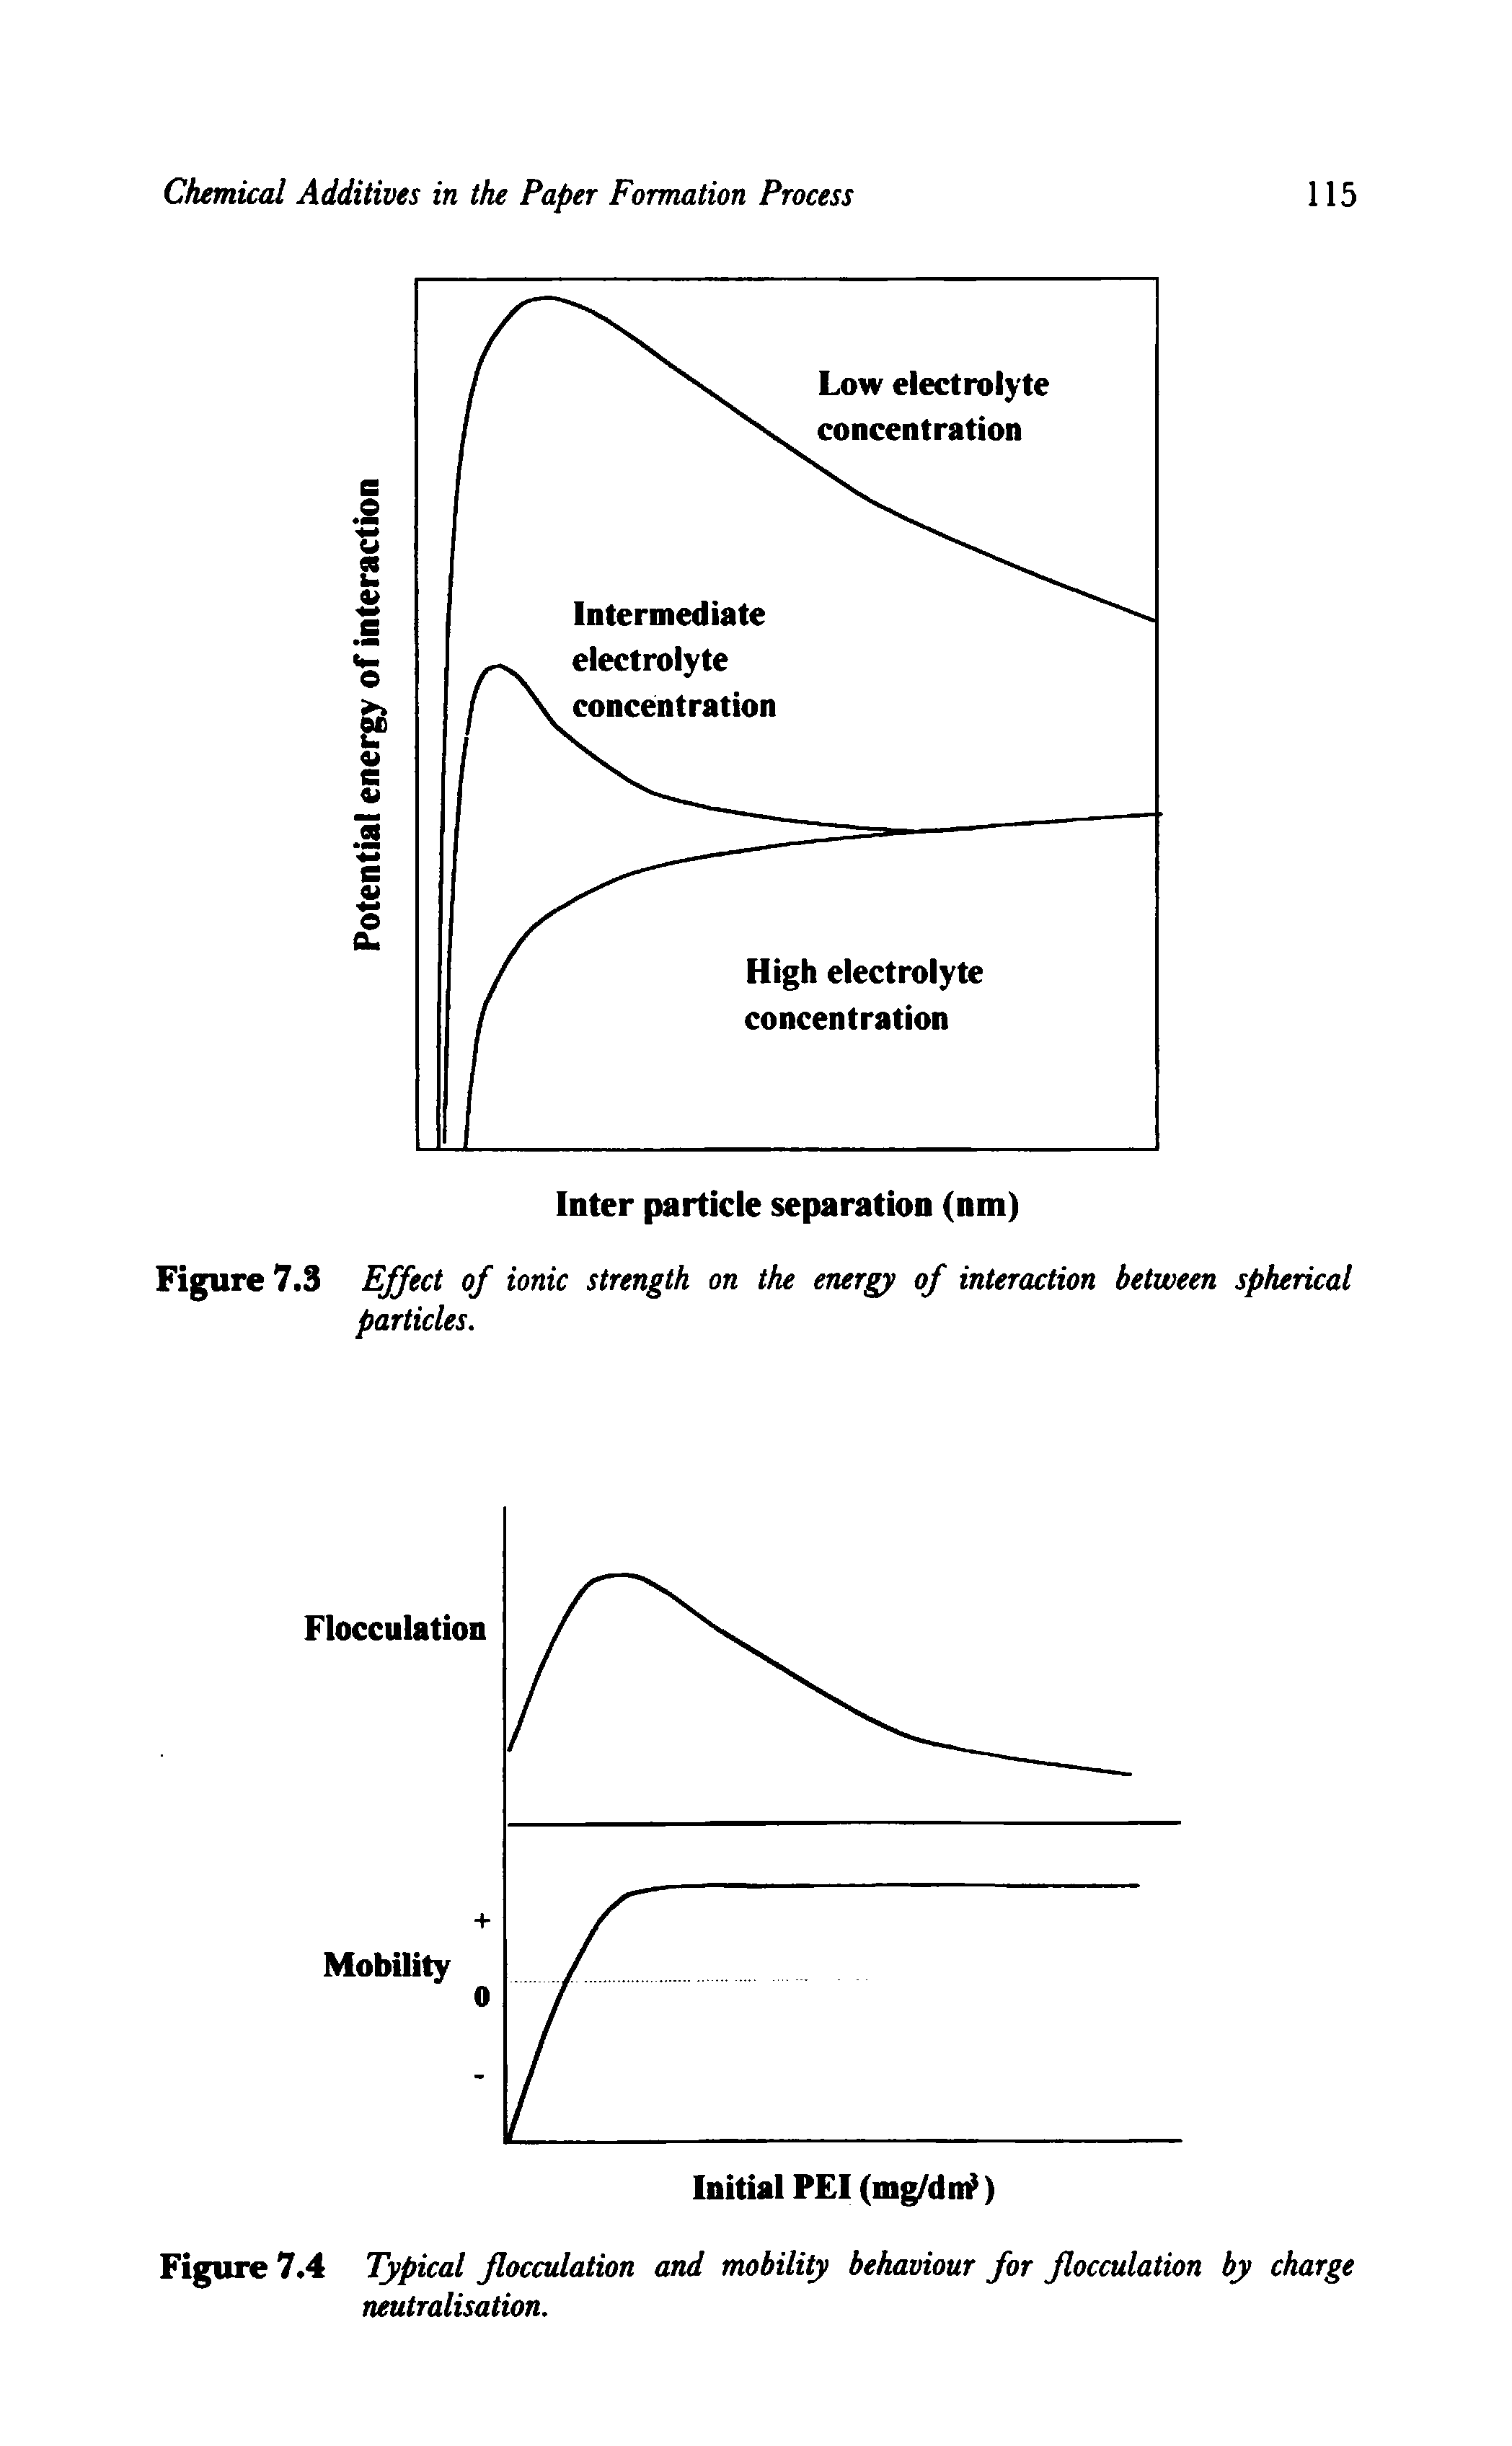 Figure 7.4 Typical flocculation and mobility behaviour for flocculation by charge neutralisation.